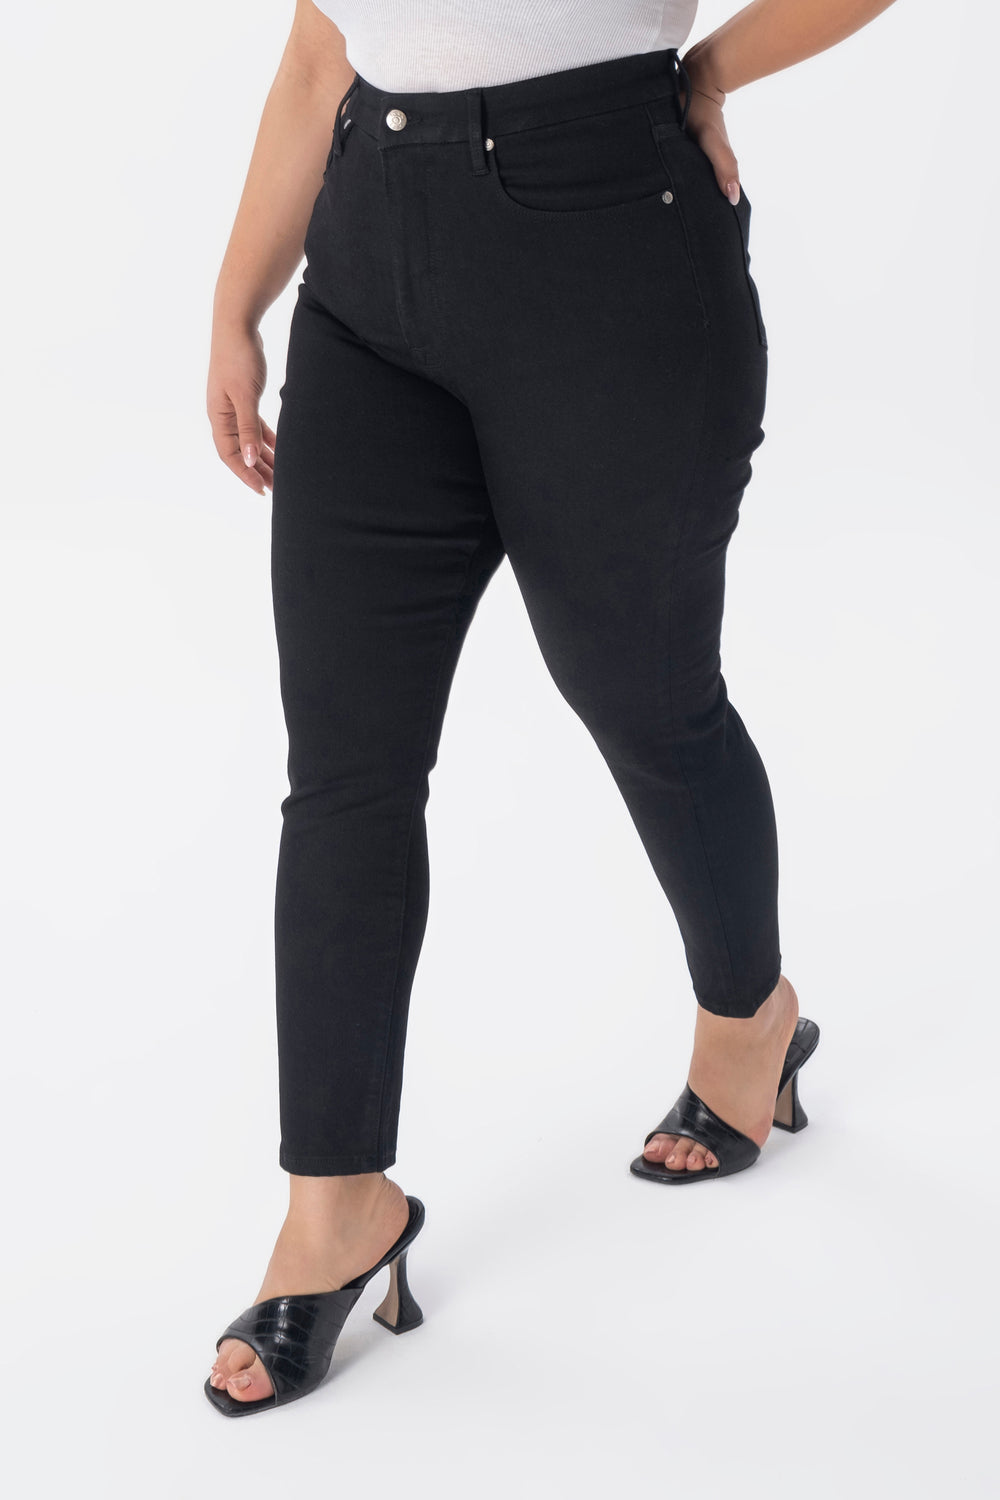 Classic skinny black pants for plus size women. Shop the ultra high waisted super skinny black jeans at INAN ISIK.